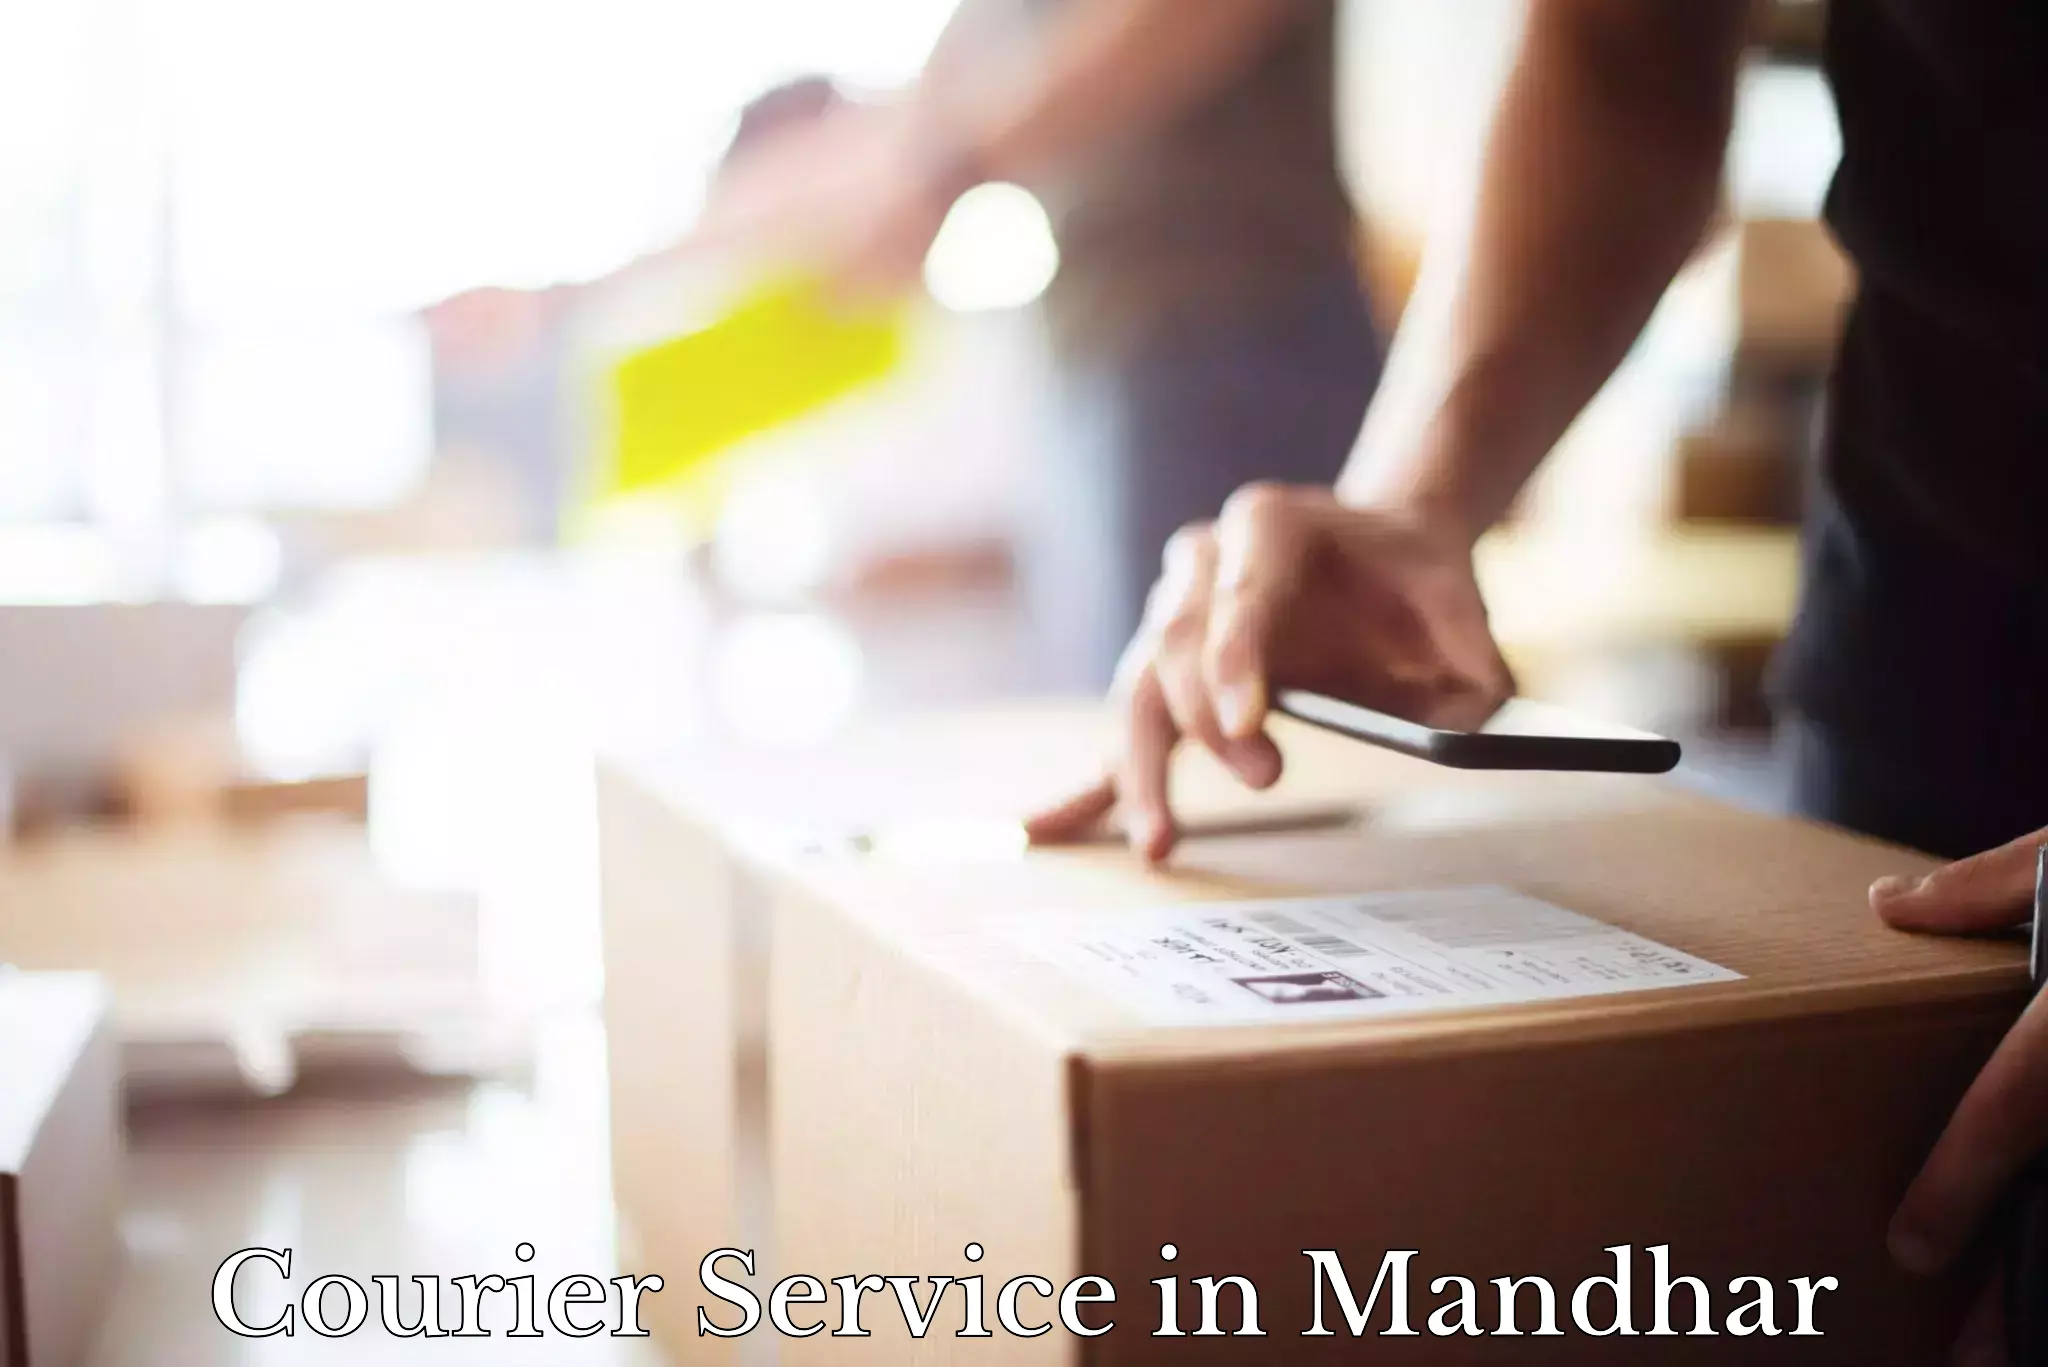 Multi-service courier options in Mandhar